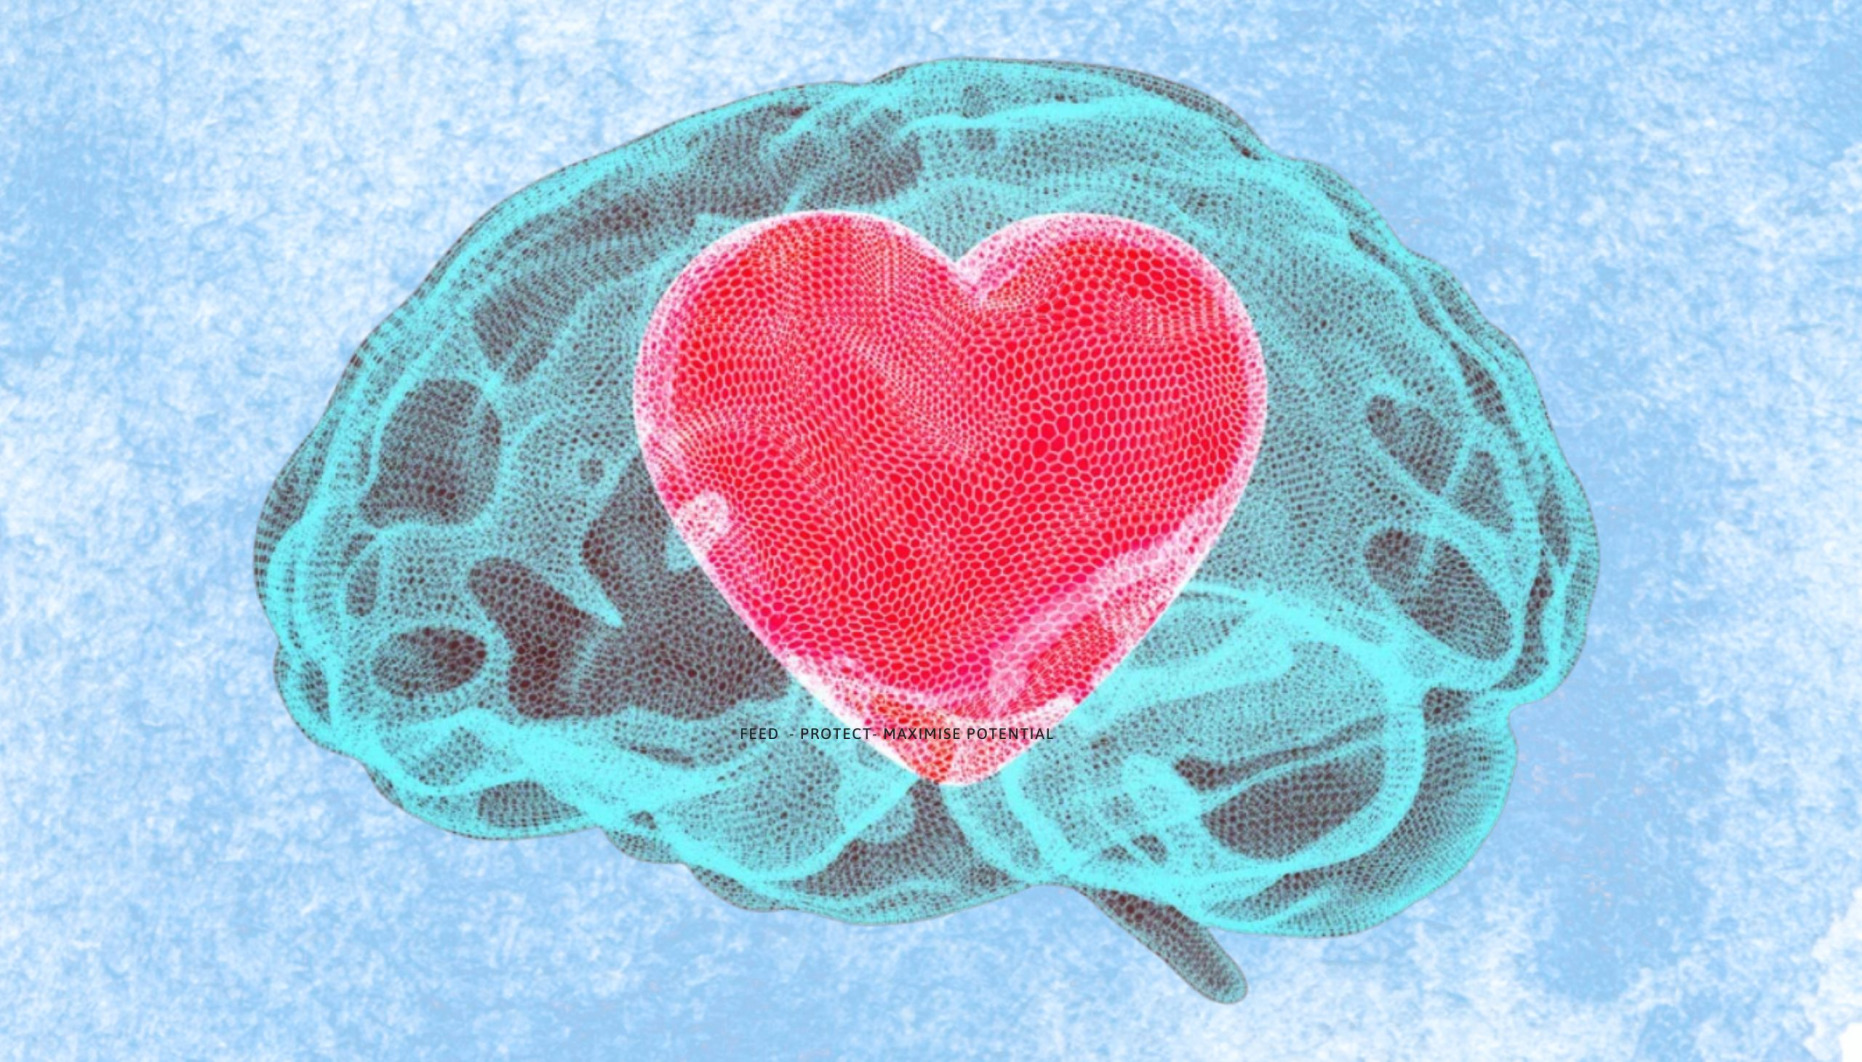 Head Matters 2023 - love your brain - a pixellated brain with heart overlay